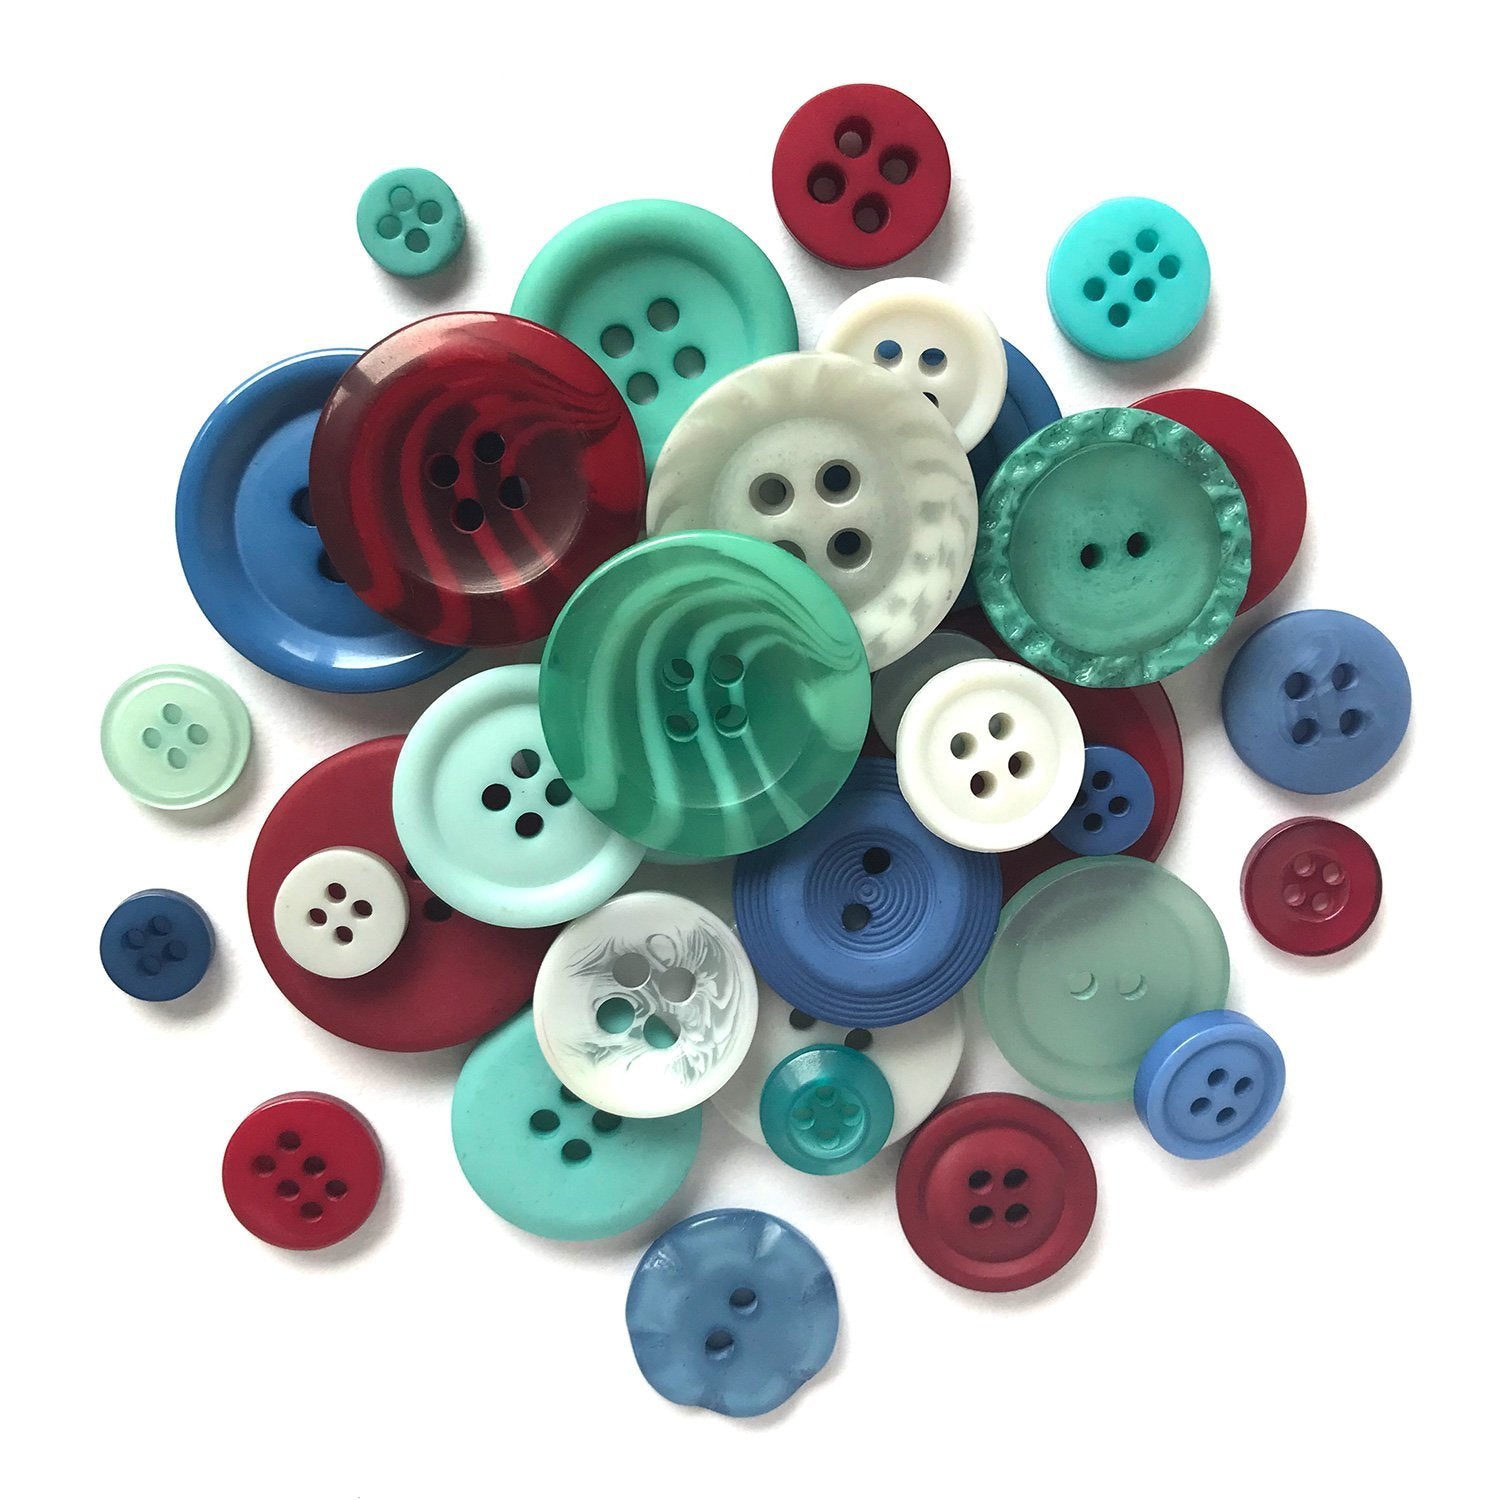 Winter Wonderland - BB94 - Buttons Galore and More